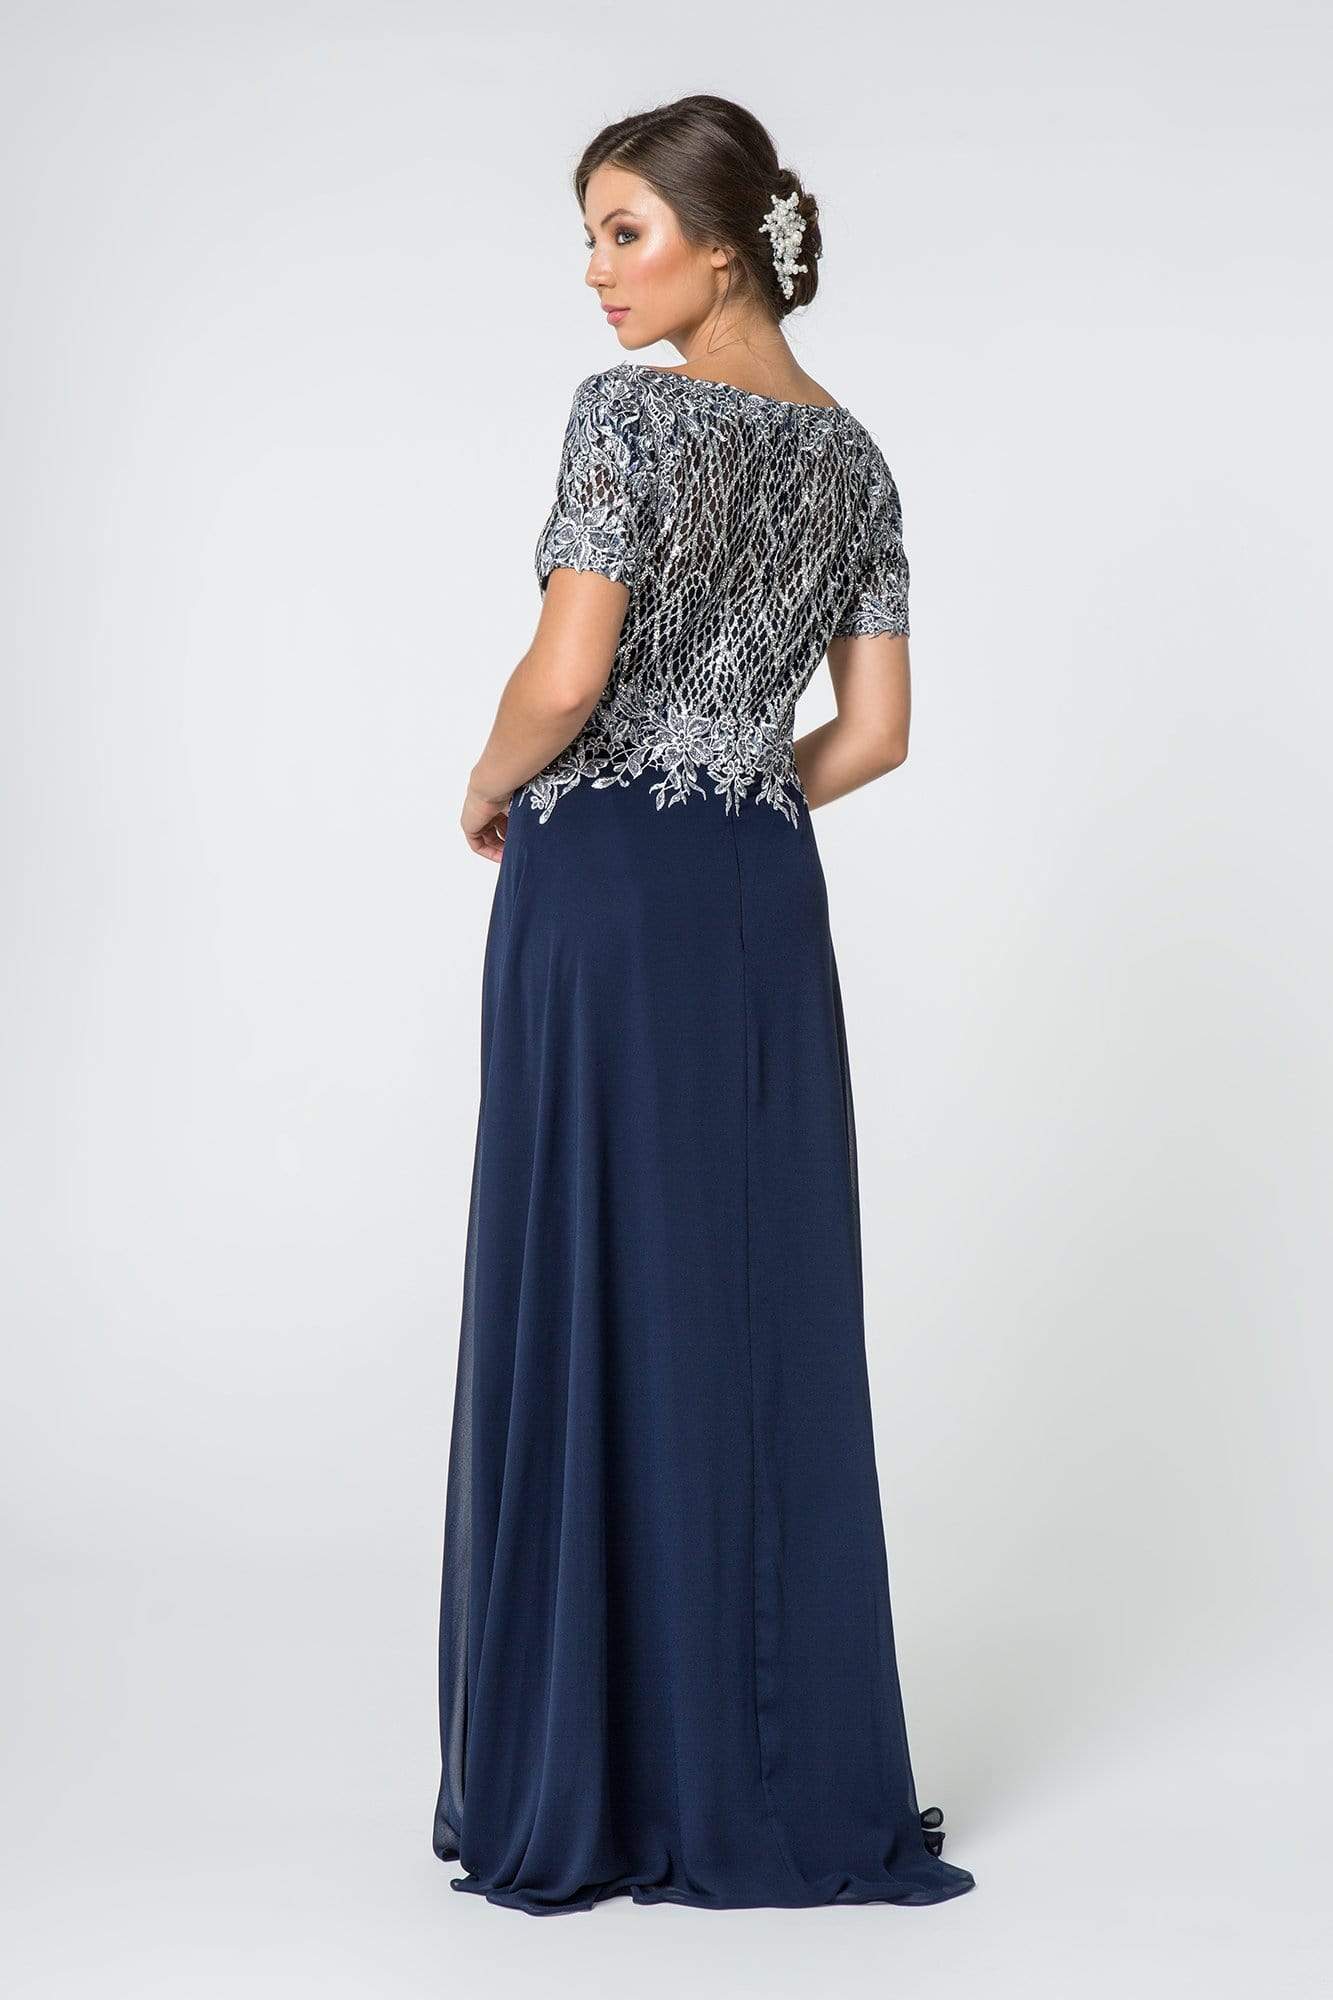 Elizabeth K - GL2826 Metallic Lace Embroidered Chiffon Dress Mother of the Bride Dresses